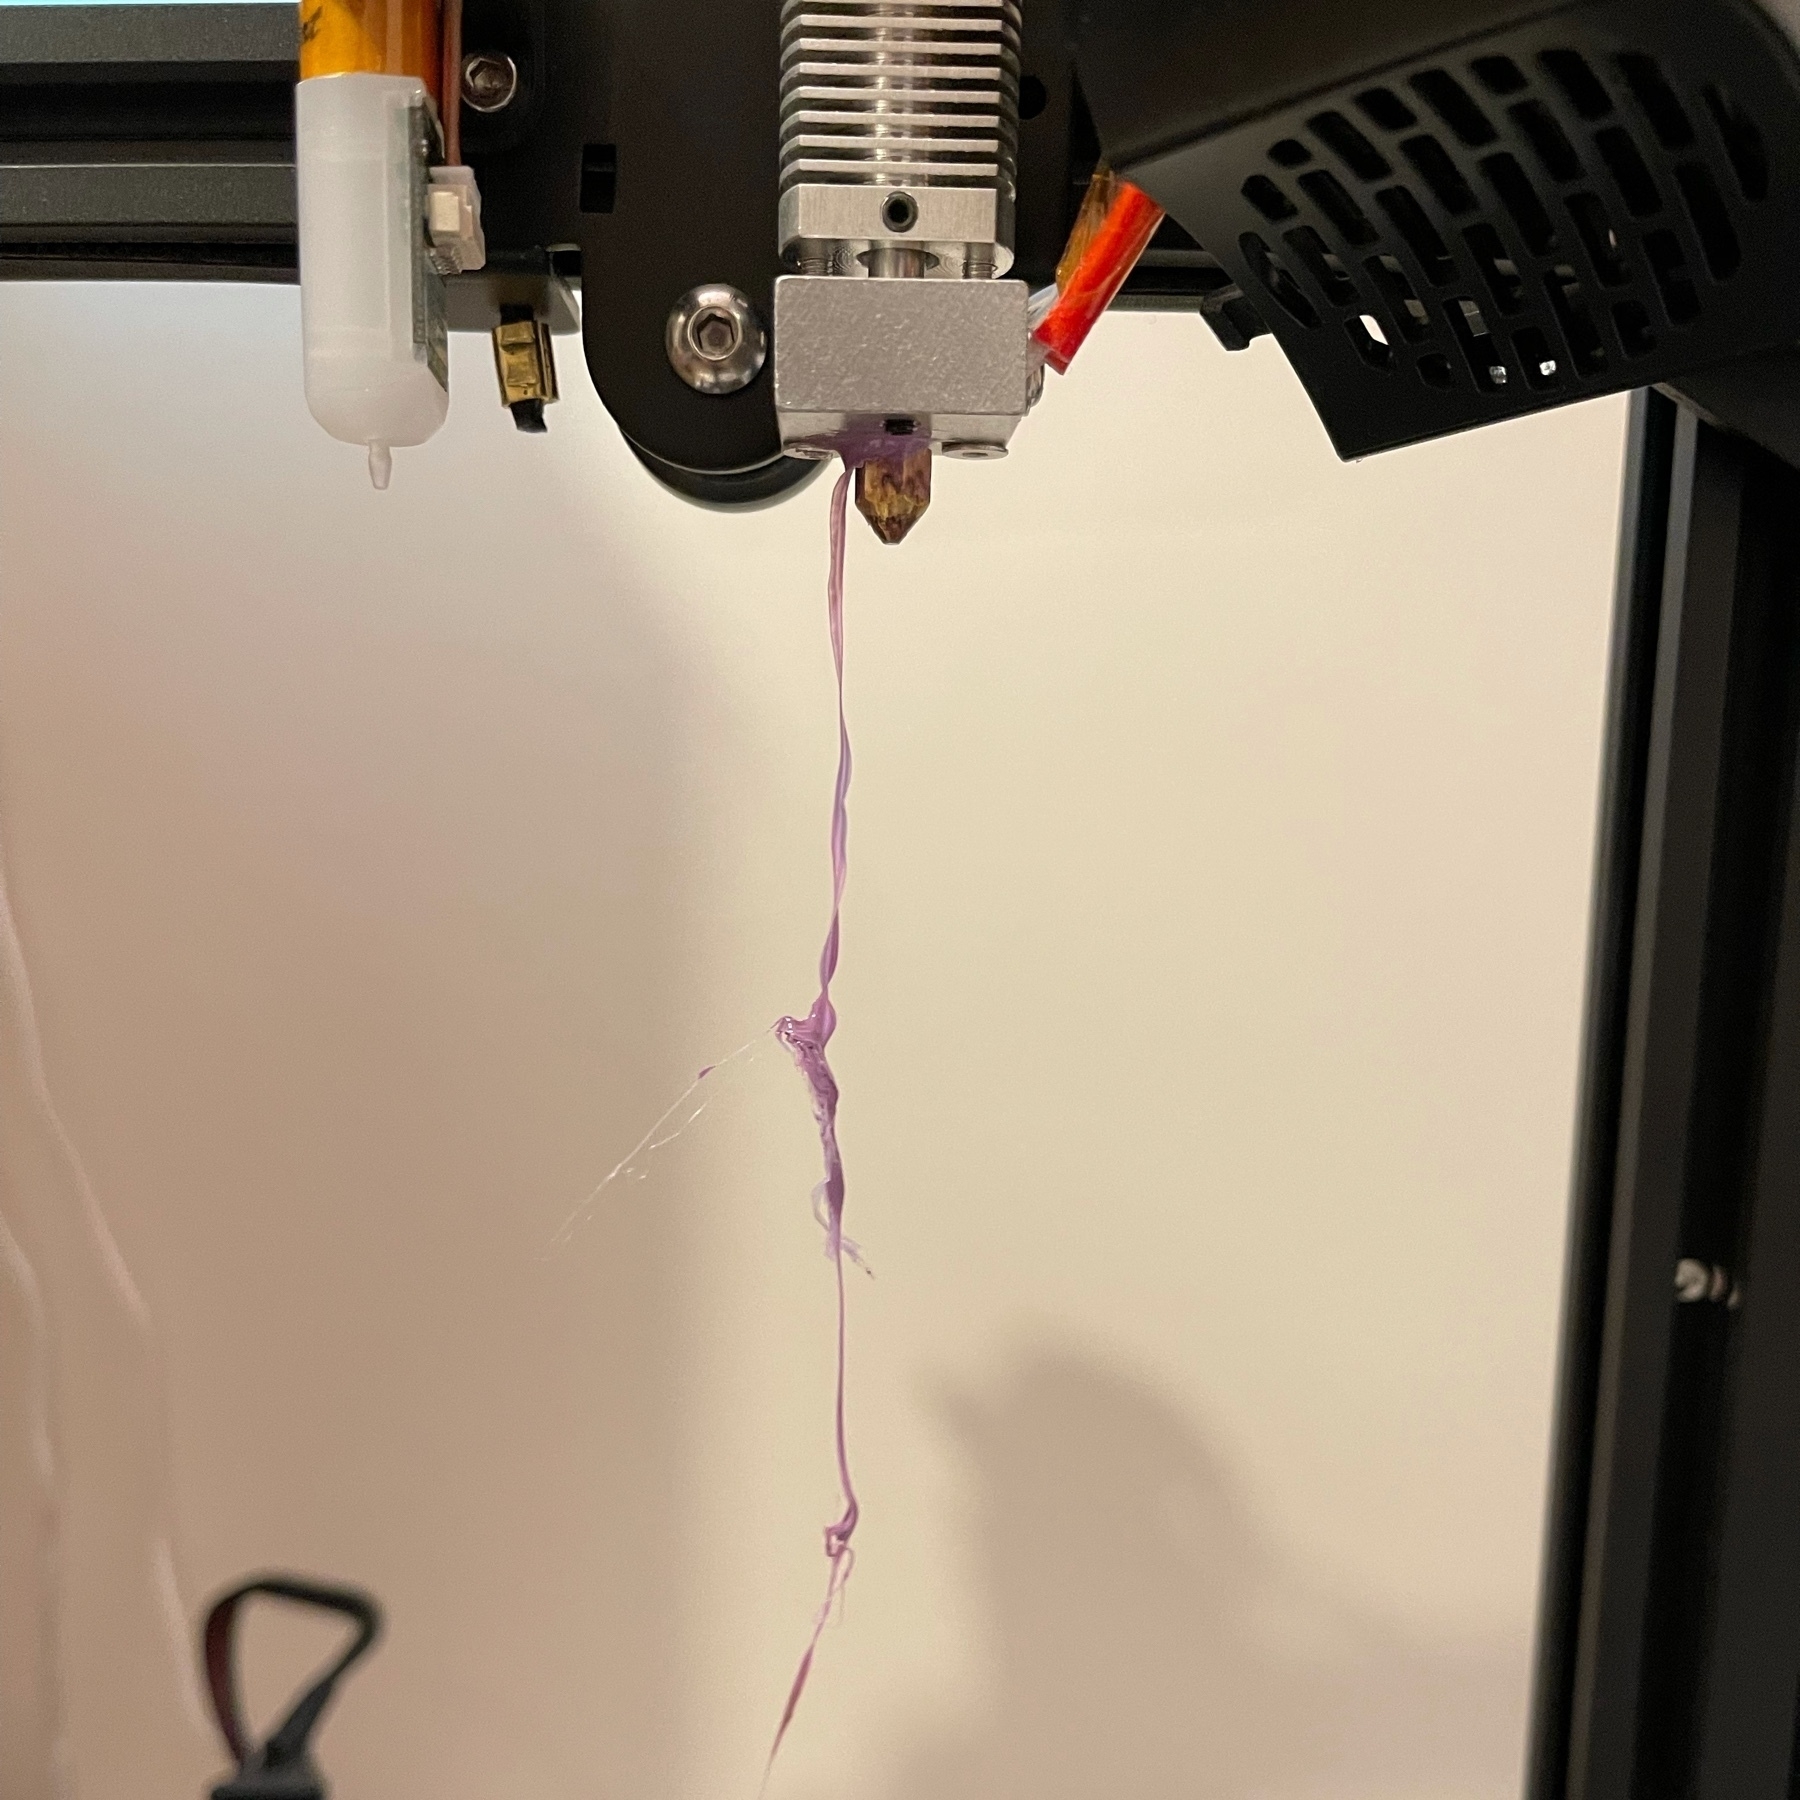 Lilac filament dangling from a bare hot end of a 3d printer. 